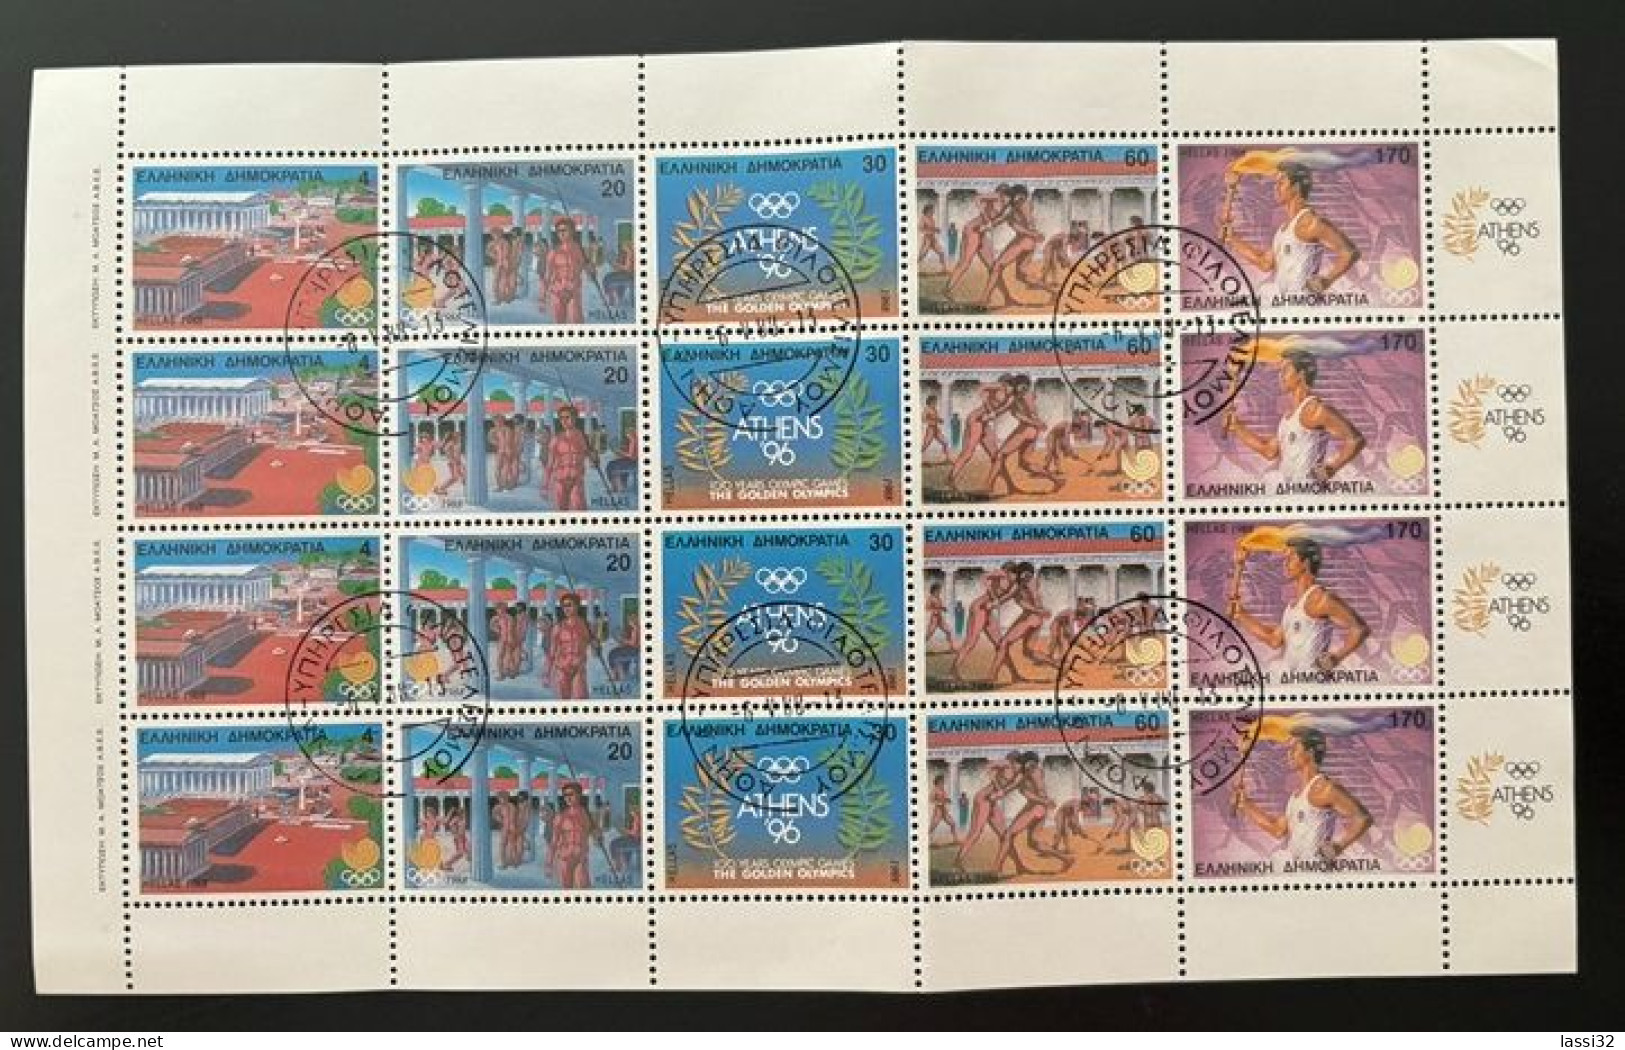 GREECE, 1988, Seoul Olympic Games Sheet, USED (FOLED) - Used Stamps